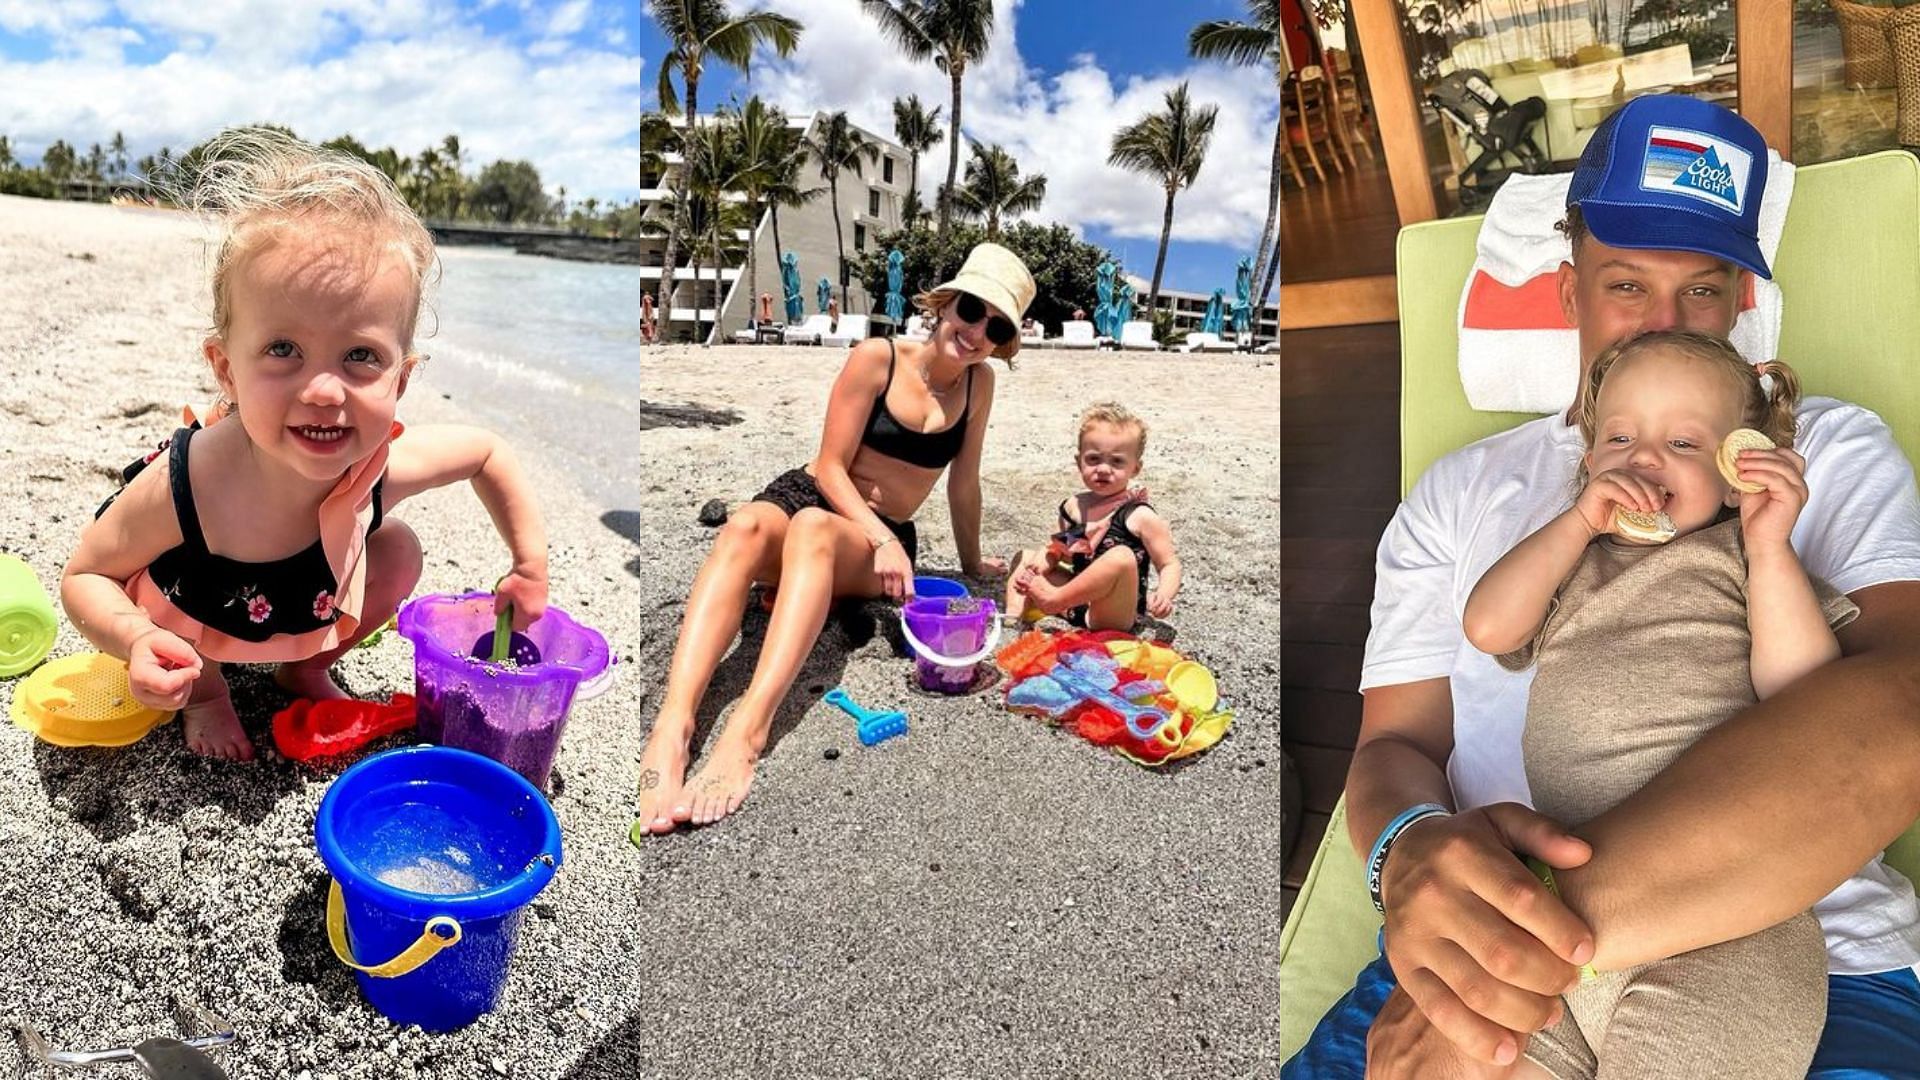 Patrick Mahomes, Wife Brittany Enjoy Tropical Vacation with Both Kids in  Fun Photos: 'Island Life